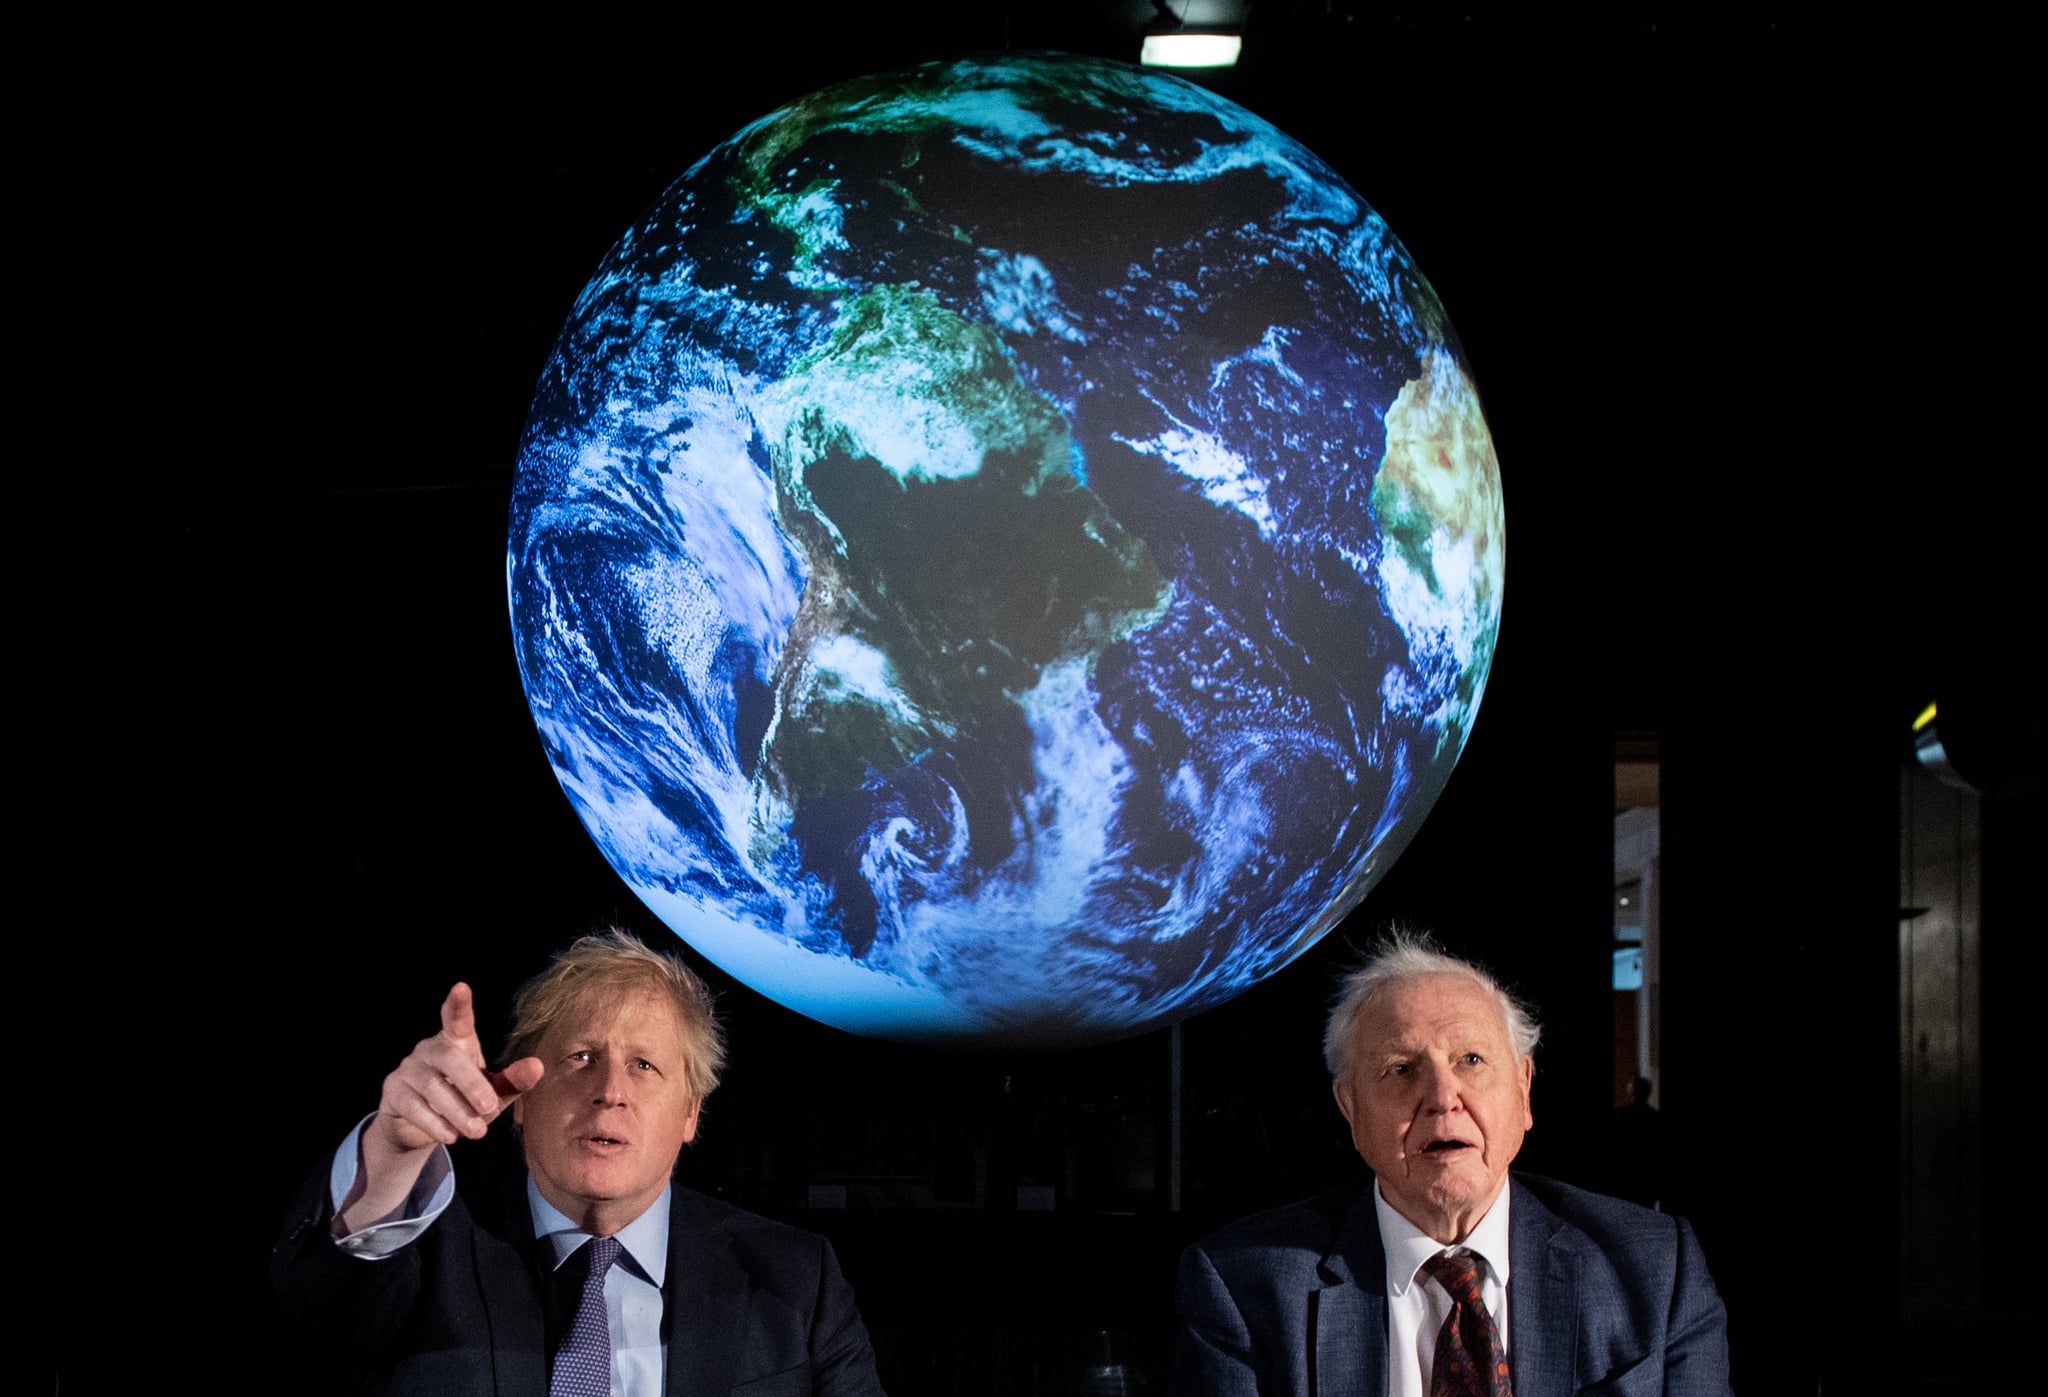 LONDON, UNITED KINGDOM – FEBRUARY 4:  British Prime Minister Boris Johnson (L) and British broadcaster and naturalist Sir David Attenborough speak with school children during the launch of the UK-hosted COP26 UN Climate Summit, which will take place this autumn in Glasgow, at the Science Museum on February 4, 2020 in London, England. Johnson will reiterate the government's commitment to net zero by 2050 target and call for international action to achieve global net zero emissions. The PM is also expected to announce plans to bring forward the current target date for ending new petrol and diesel vehicle sales in the UK from 2040 to 2035, including hybrid vehicles for the first time. (Photo by Chris J Ratcliffe-WPA Pool/Getty Images)